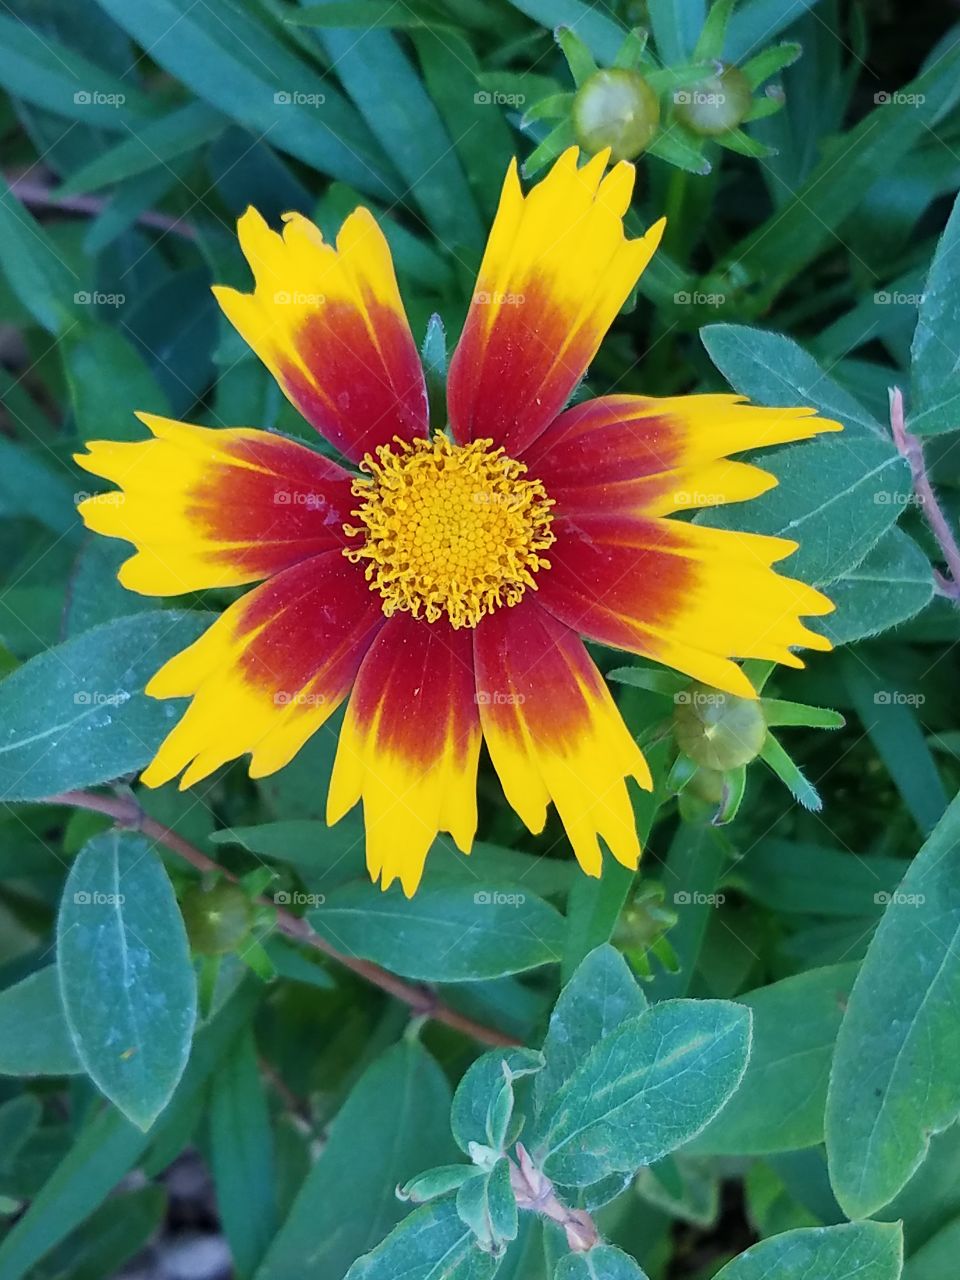 red and yellow flower closeup against a green leaf background